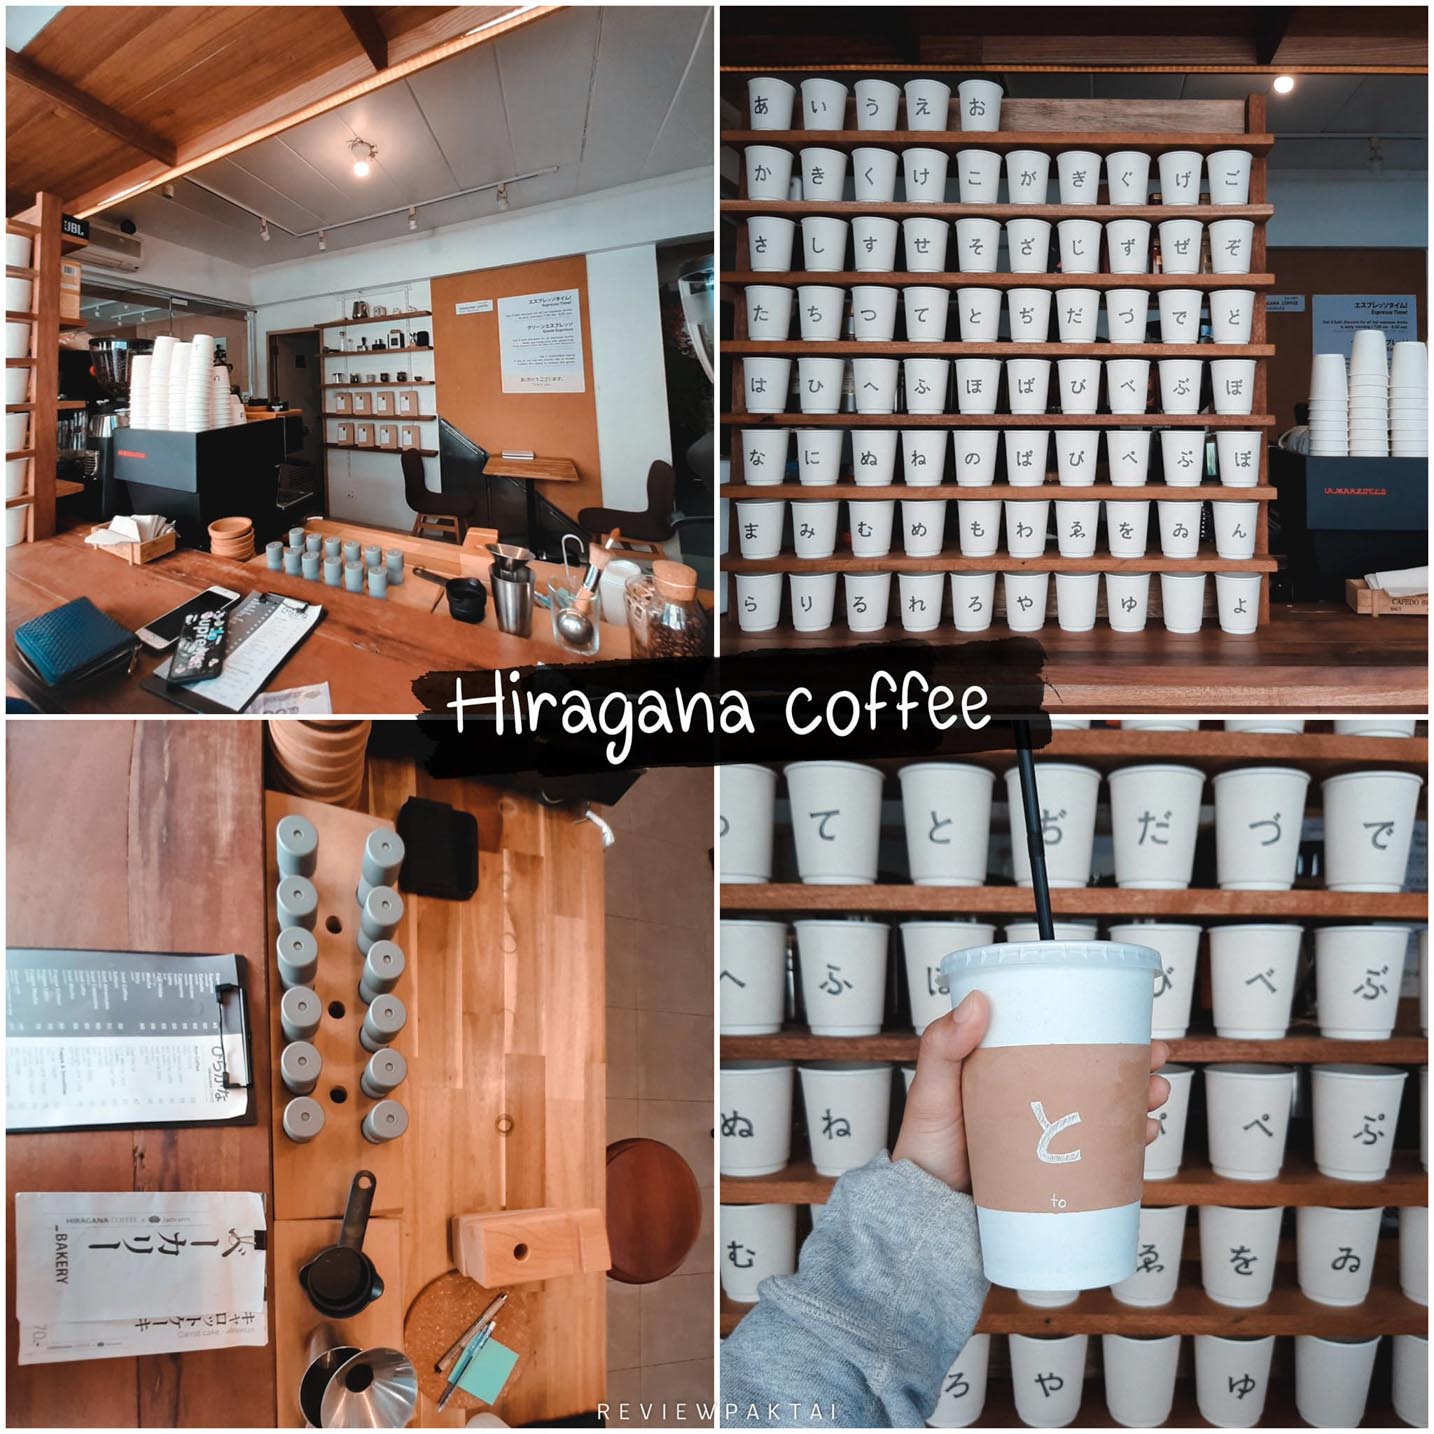 Hiragana coffee Phuket, a cute shop in Japanese style. Even though it's small, it's not ordinary. Come take beautiful photos and check in at many angles.